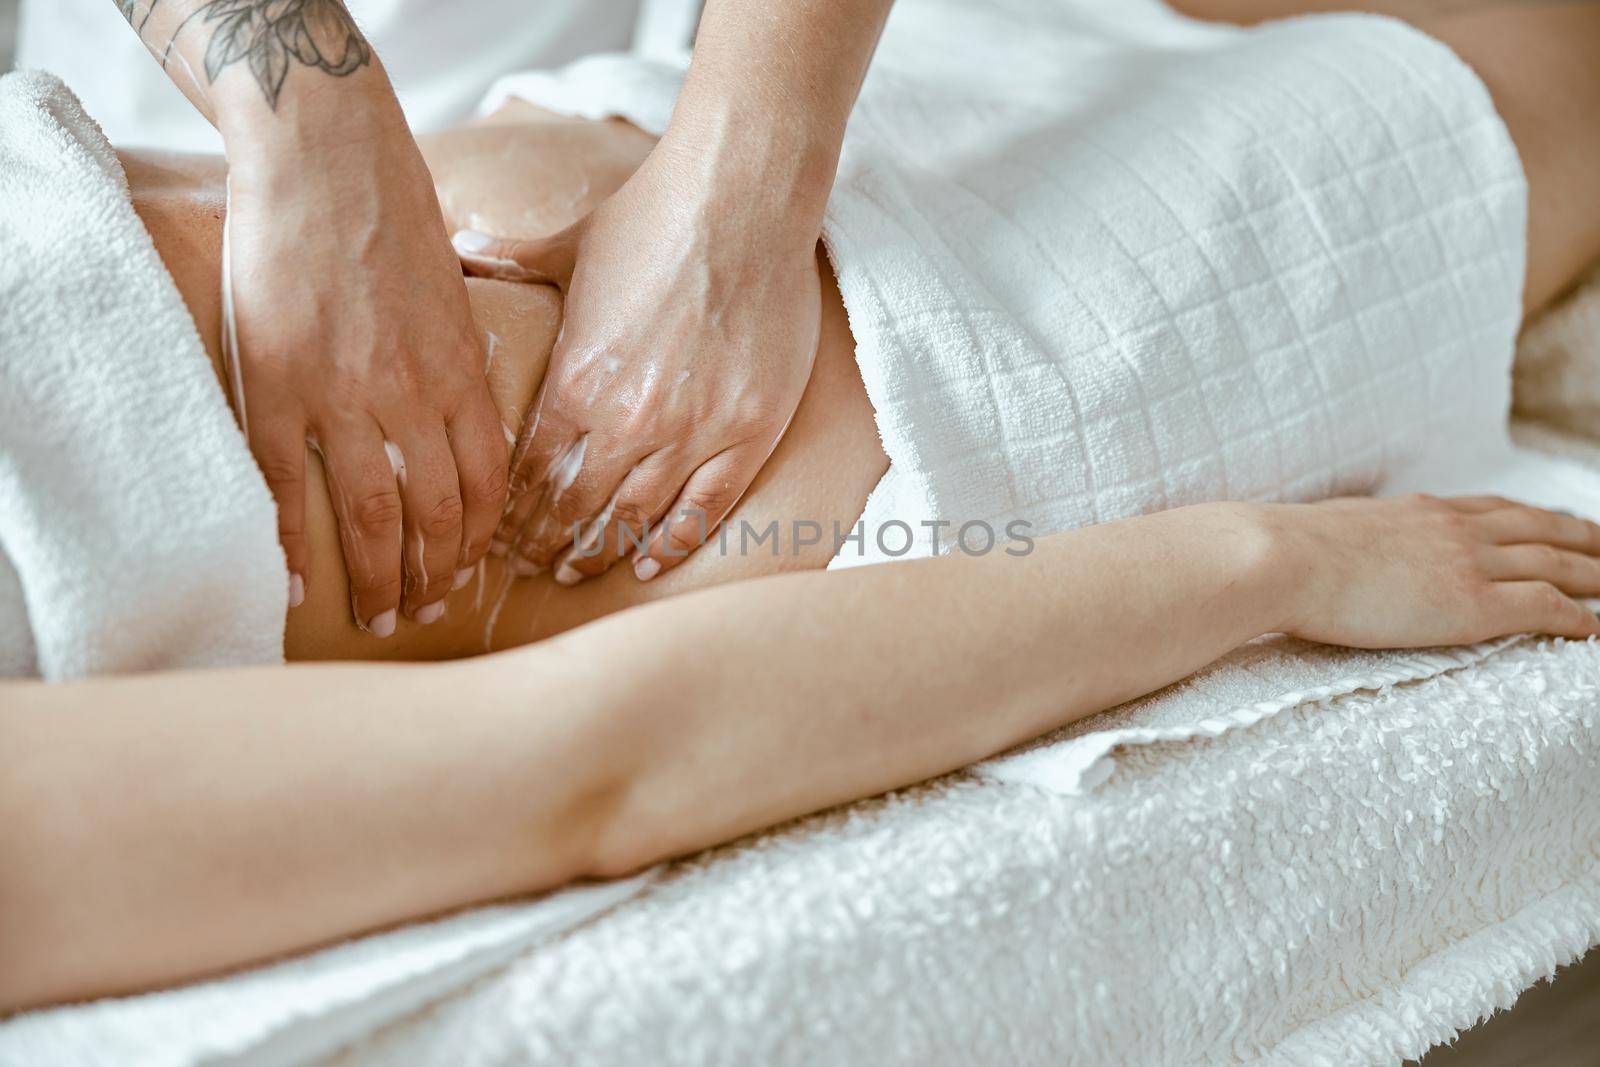 Professional massagist is doing stomach massage to young female client in modern wellness salon